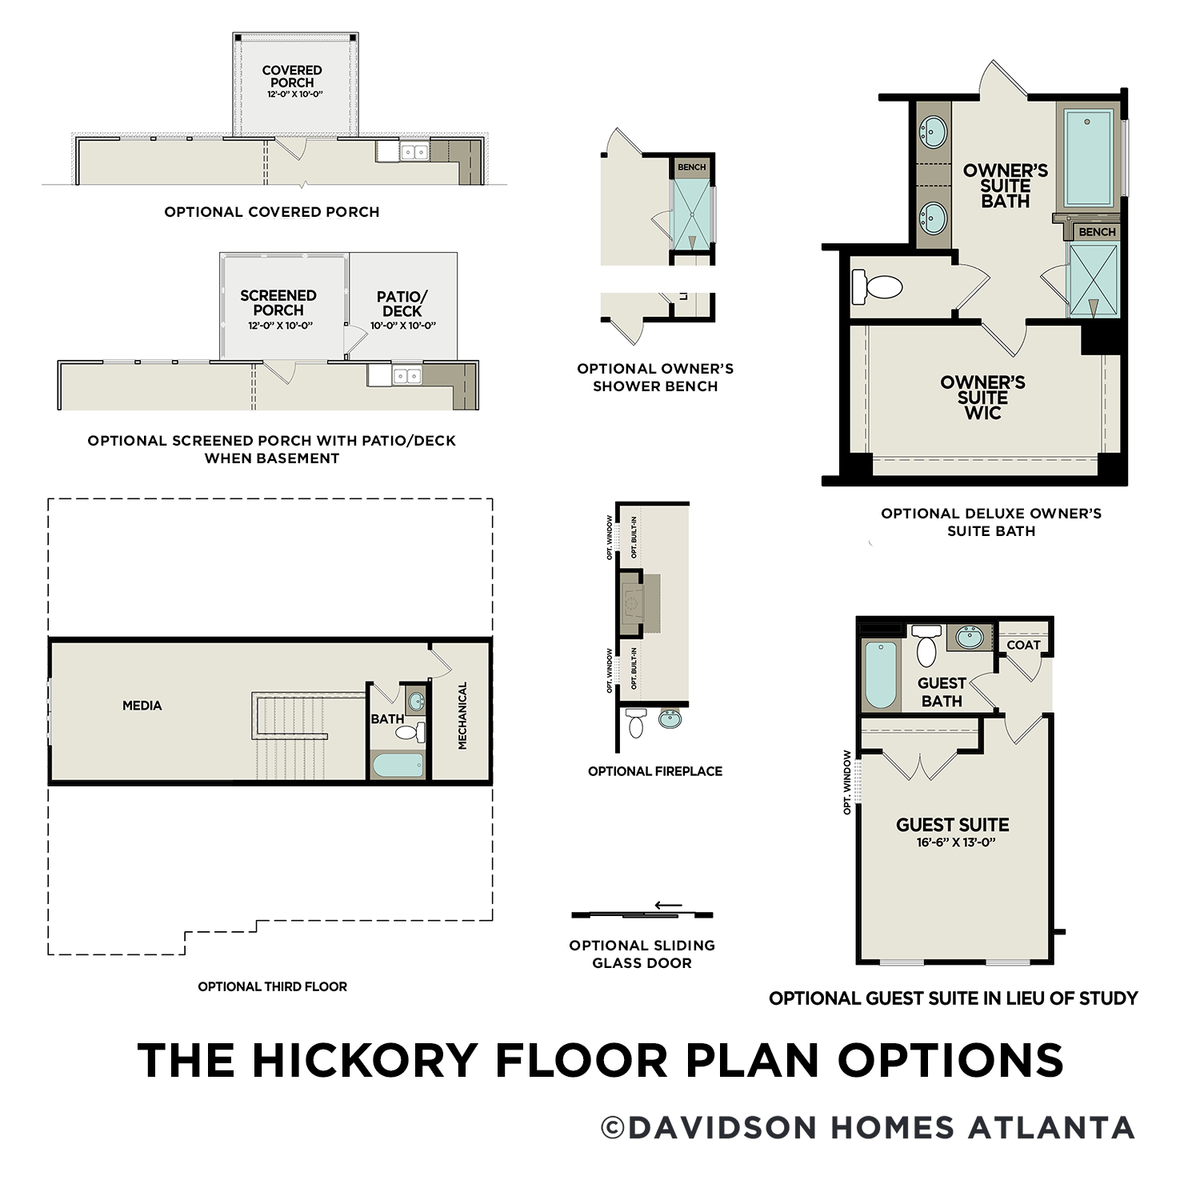 4 - The Hickory C- Unfinished Basement floor plan layout for 40 Brookside Way in Davidson Homes' Mountainbrook community.